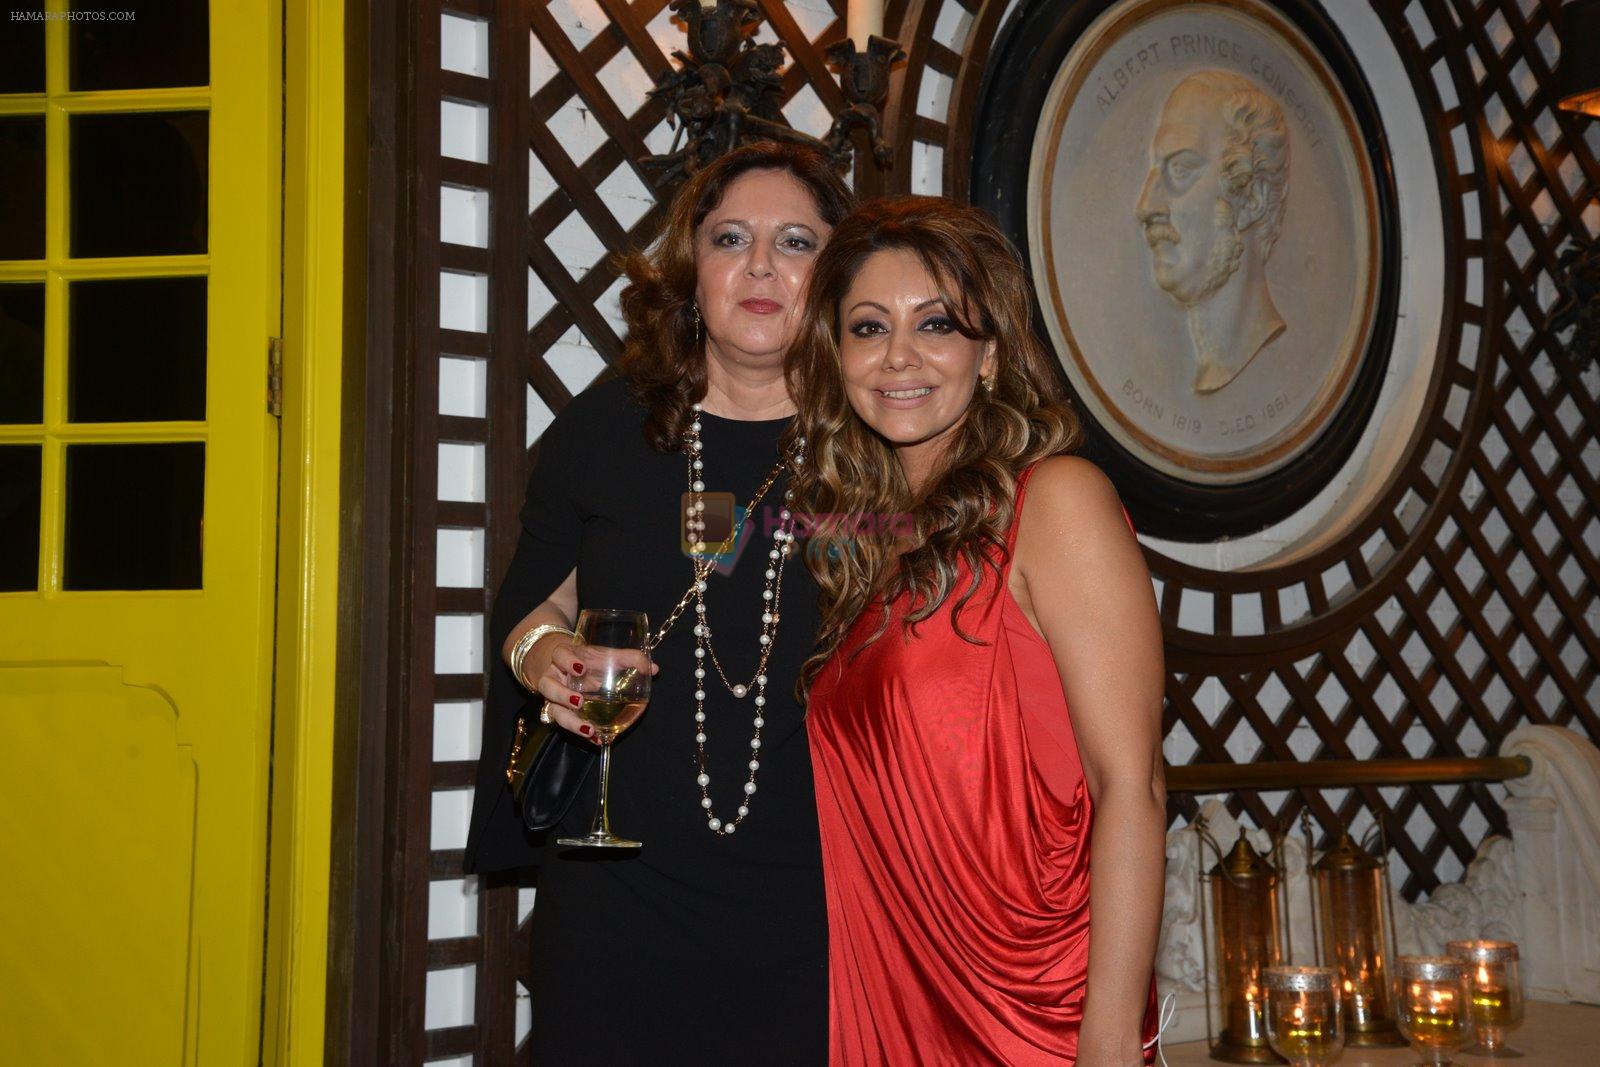 Gauri Khan's The Design Cell and Maison & Objet cocktail evening in Lower Parel, Mumbai on 11th Nov 2014